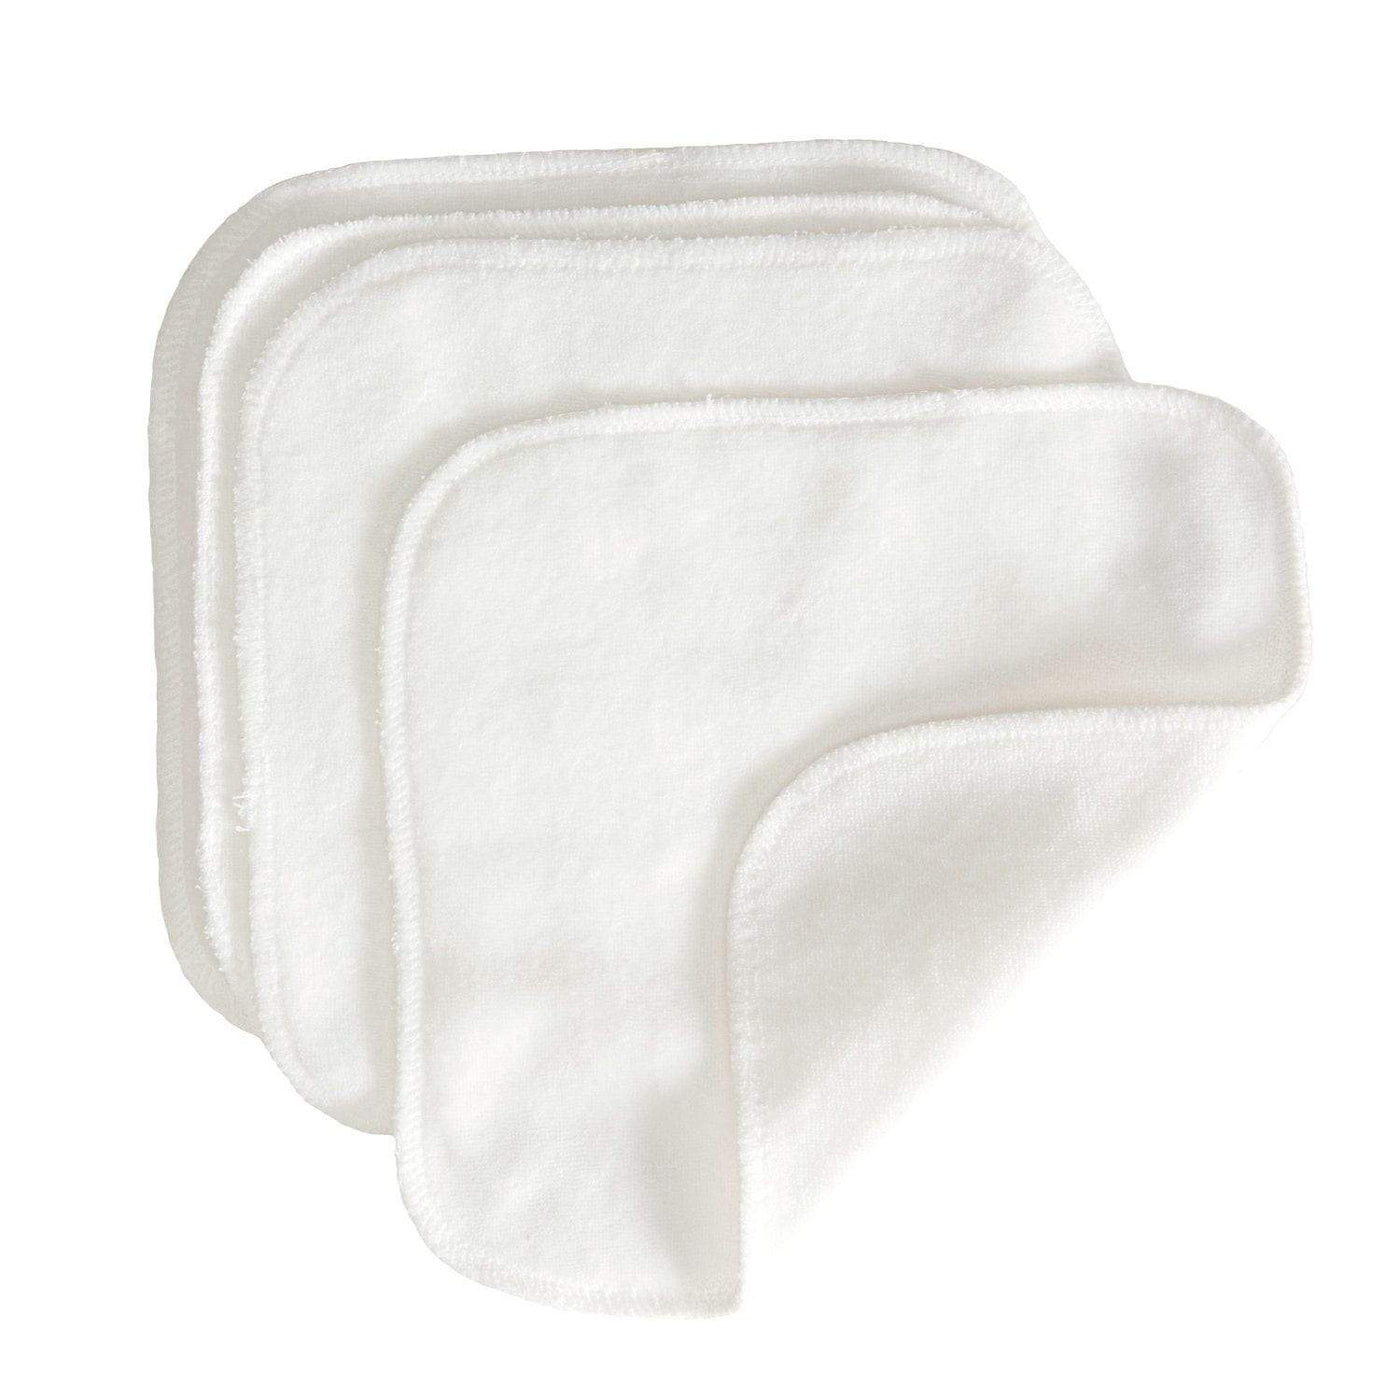 Accessories Reusable Cloth Wipes- White